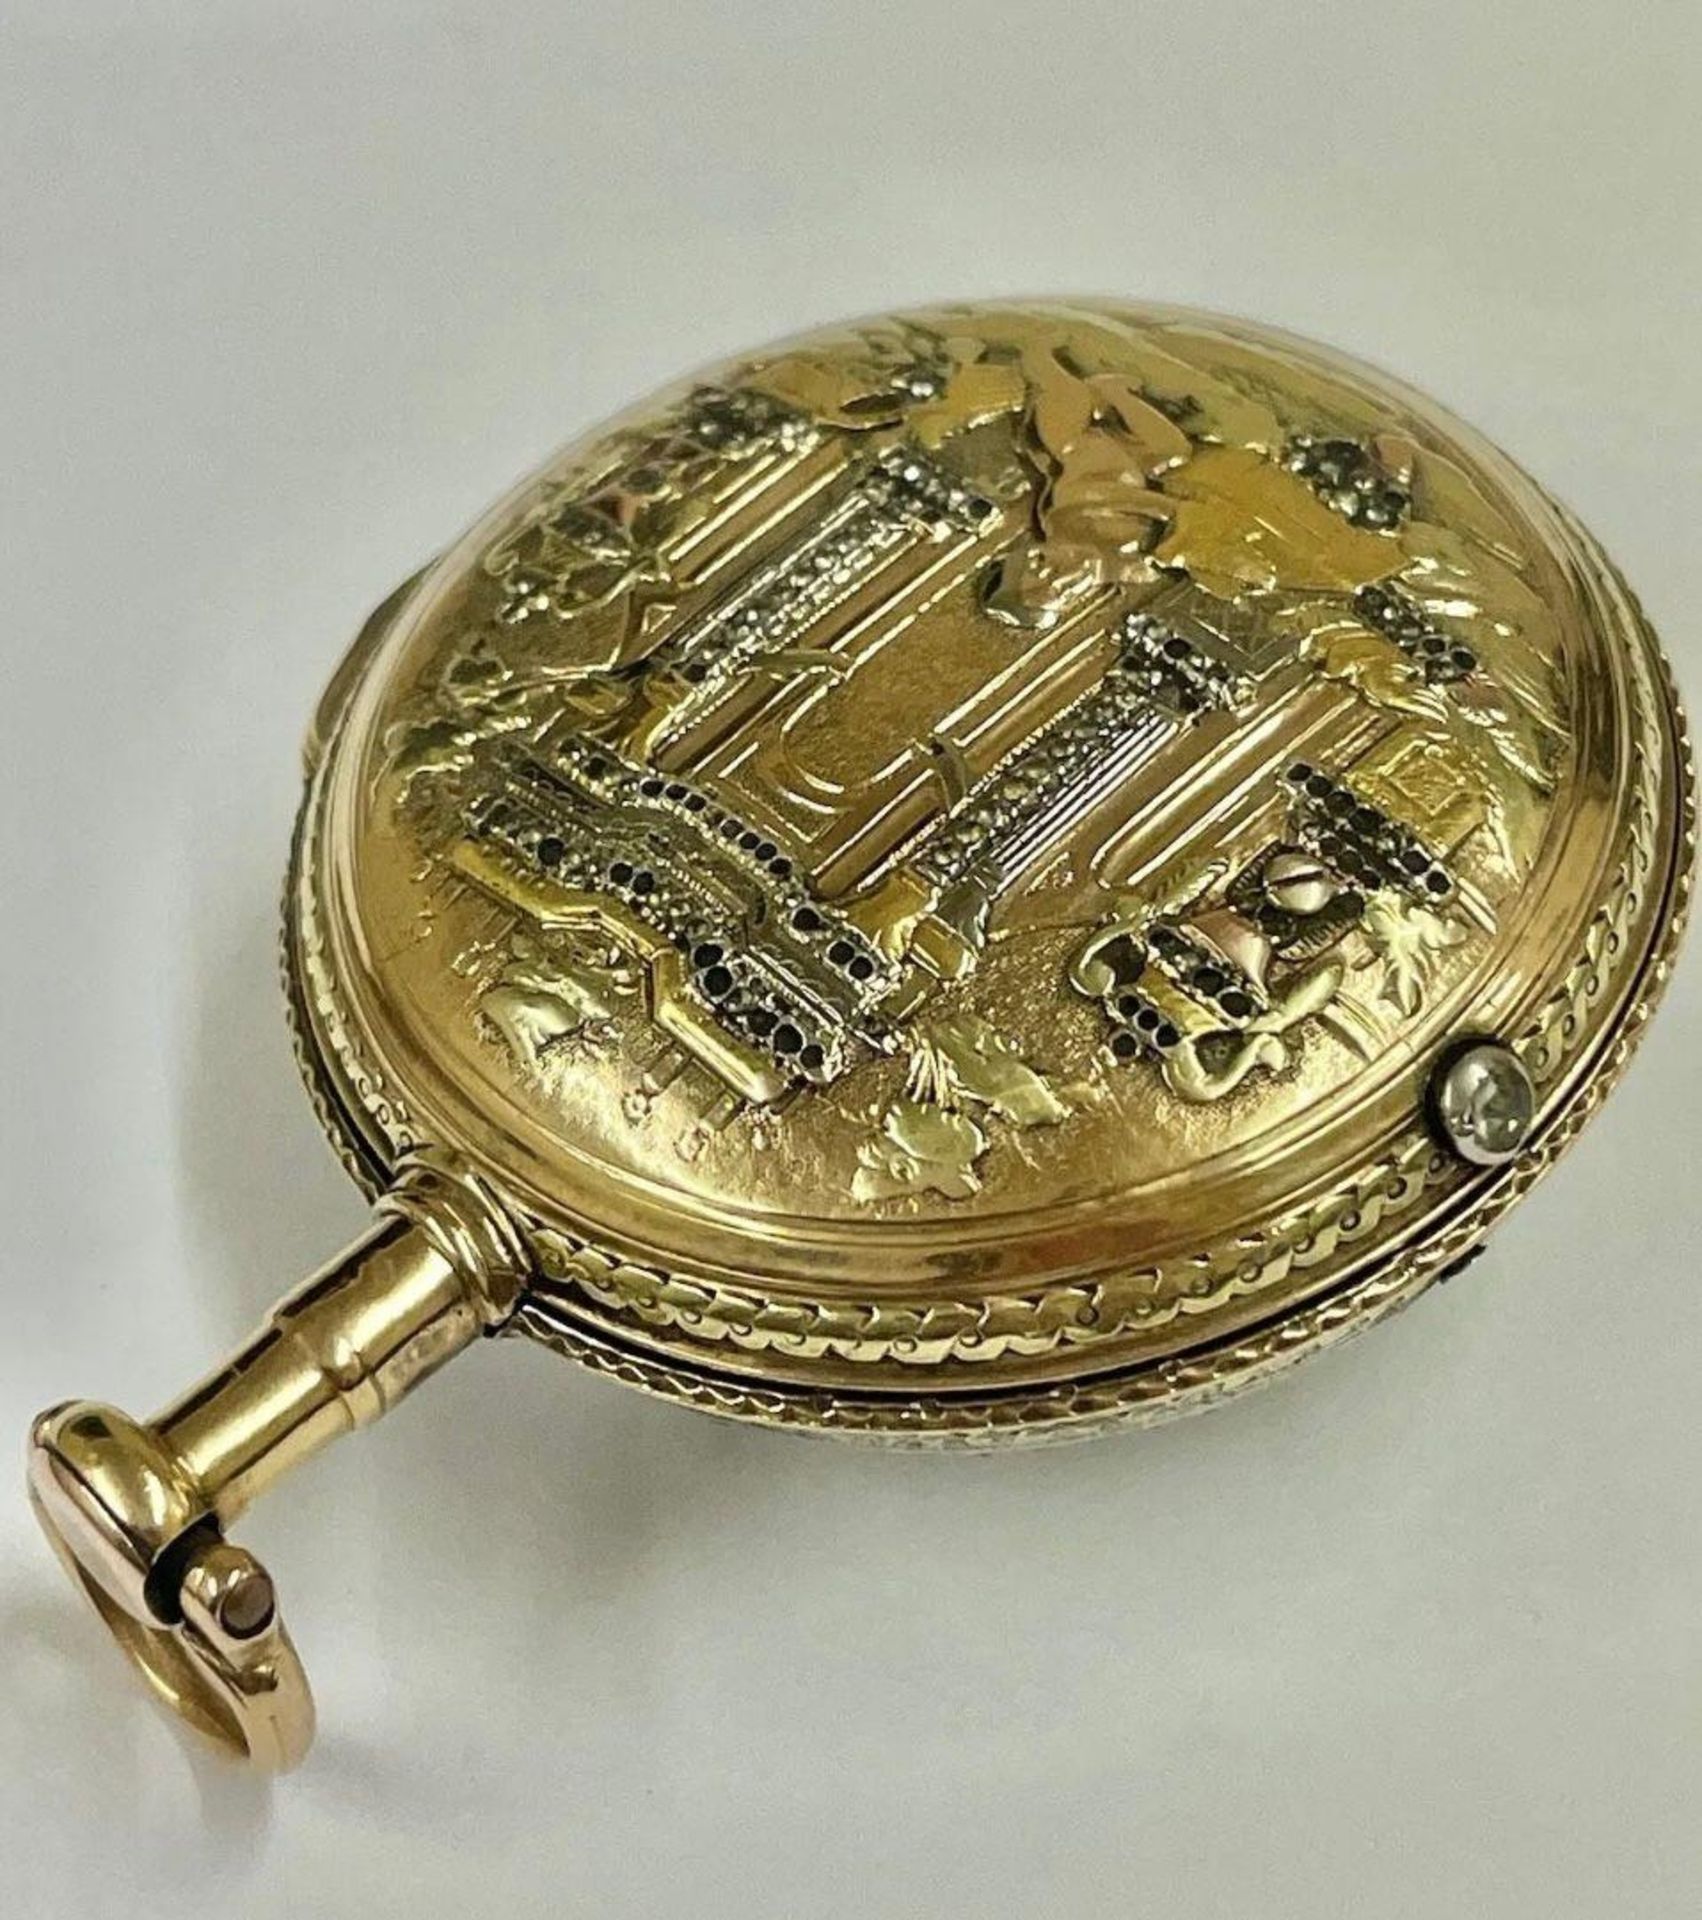 18ct gold verge fusee pocket watch , Good balance staff but wound tight needs service. - Image 4 of 6